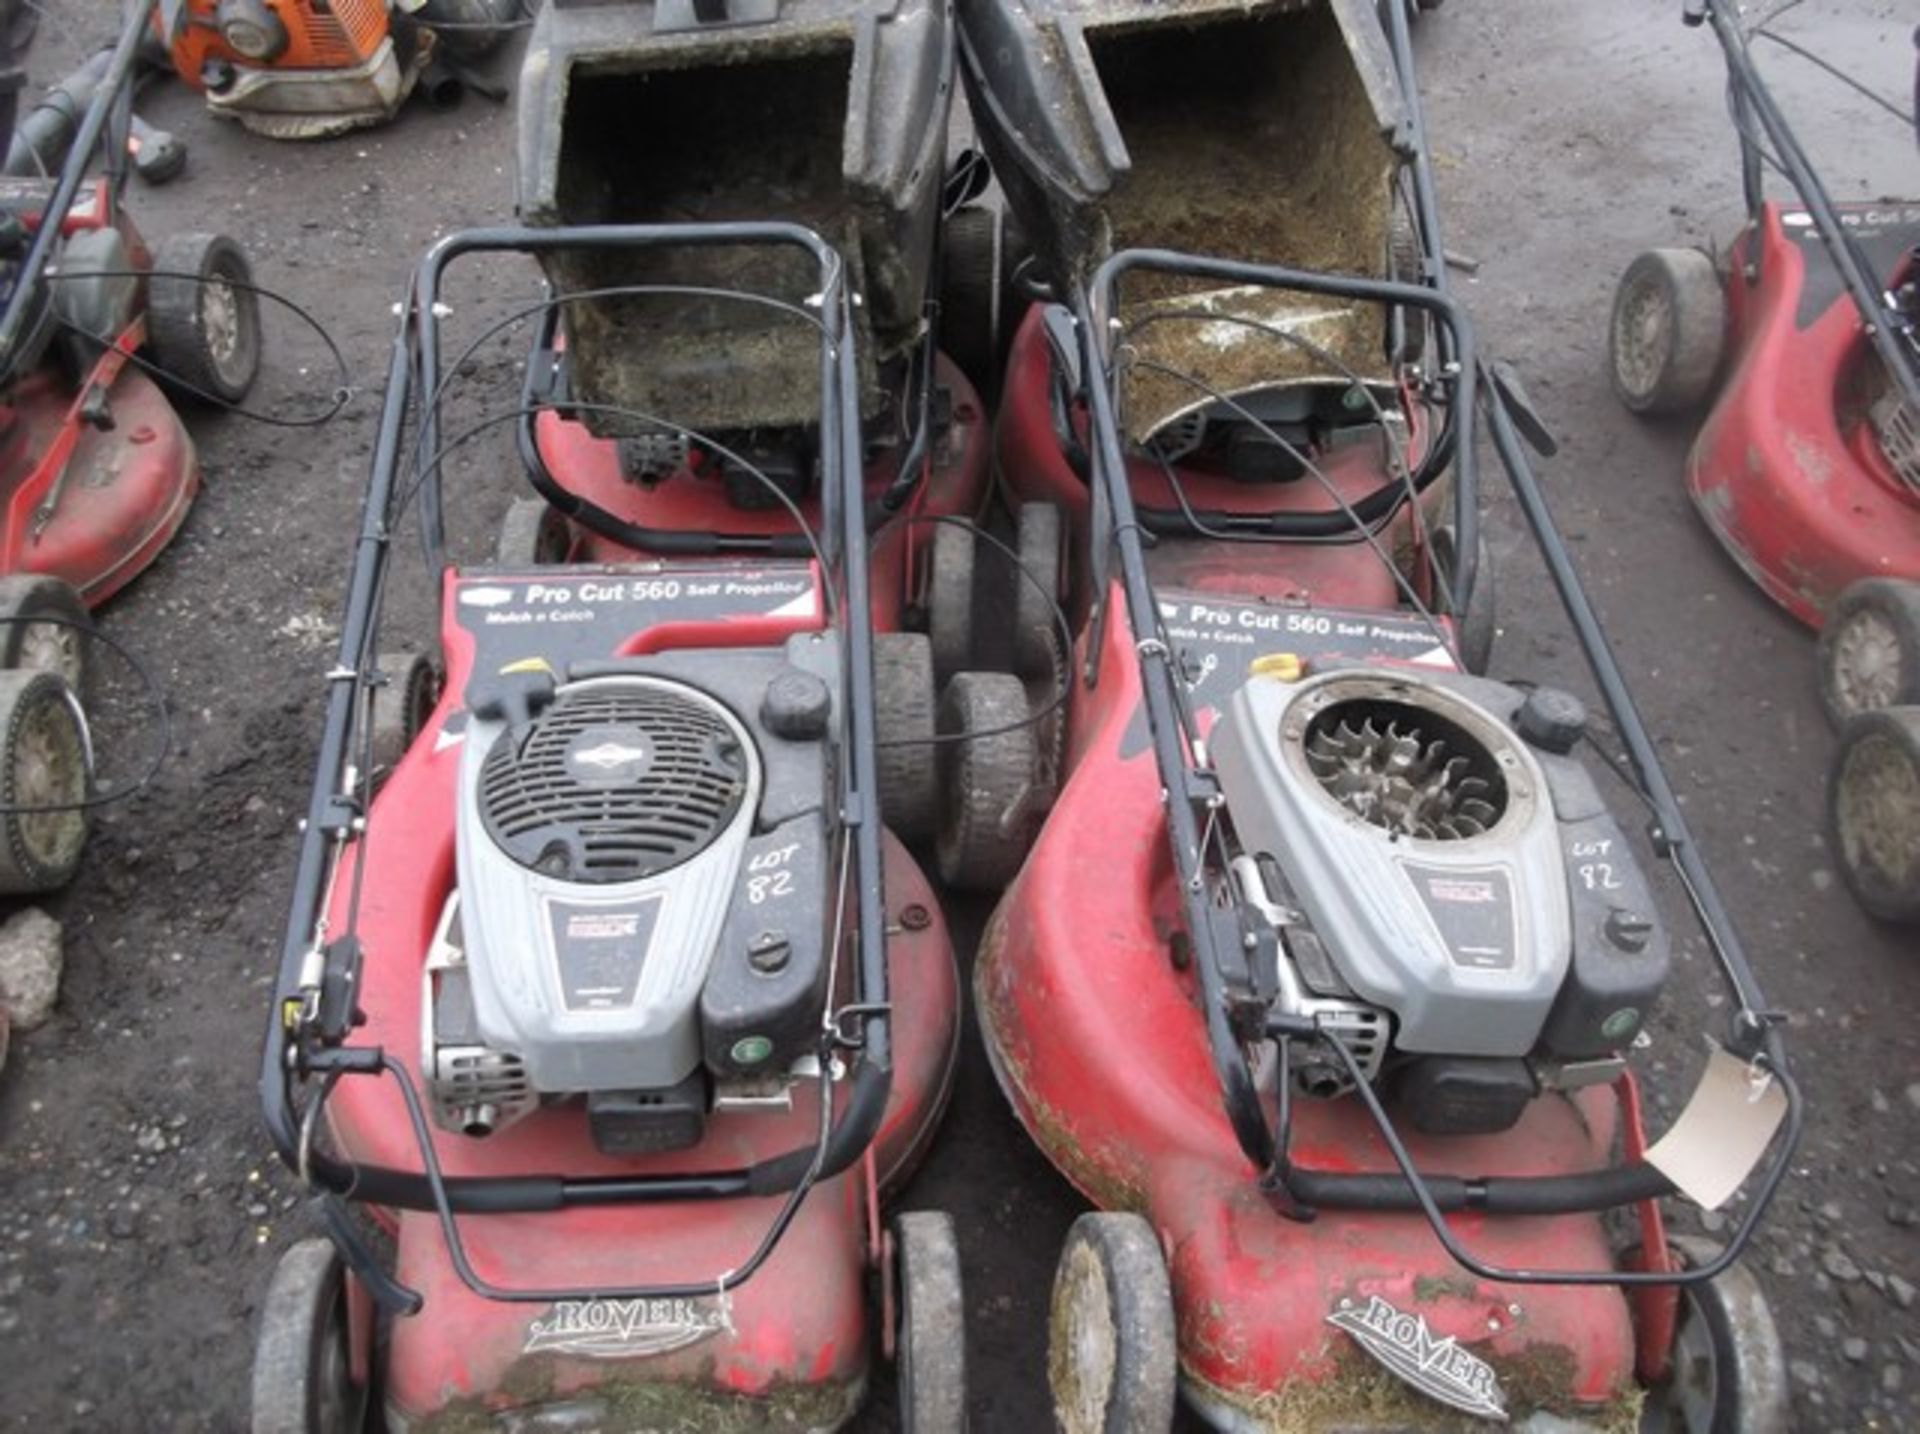 4 X ROVER SELF PROPELLED PETROL MOWERS C/W 2 X GRASS BOXES